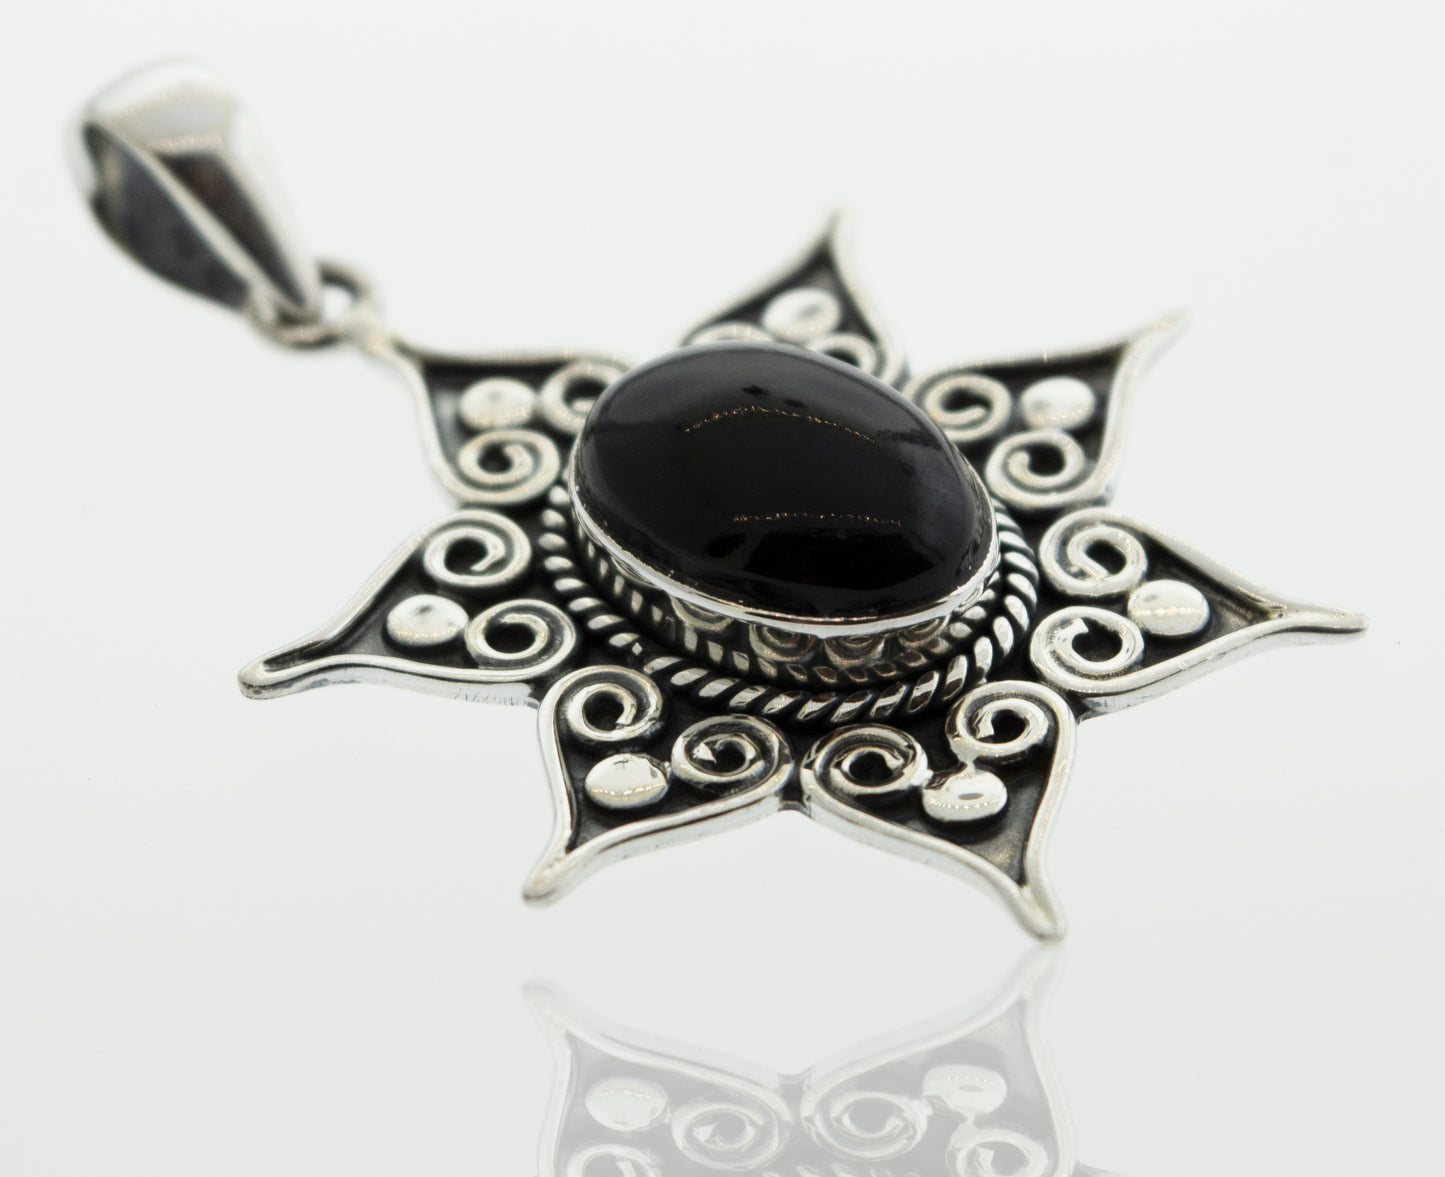 A gorgeous Super Silver Ruby Pendant with a black onyx stone in a flower setting.